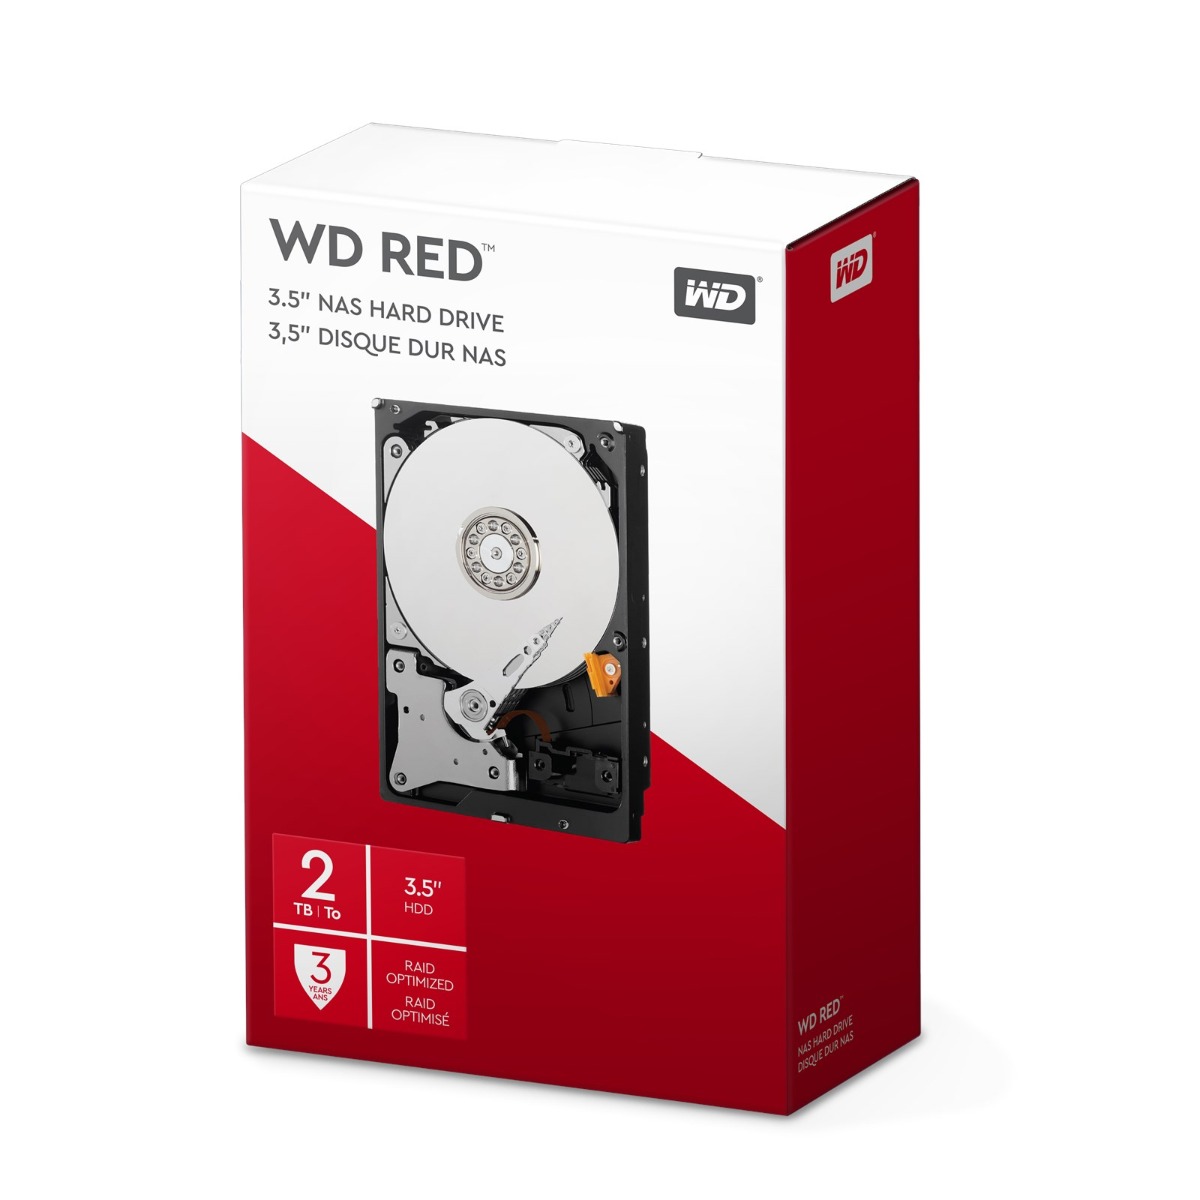 Wd Red Nas 2tb 24x7 Wd Retail Kit Hdd Nas Wdbmma0020hnc Ersn 718037815503